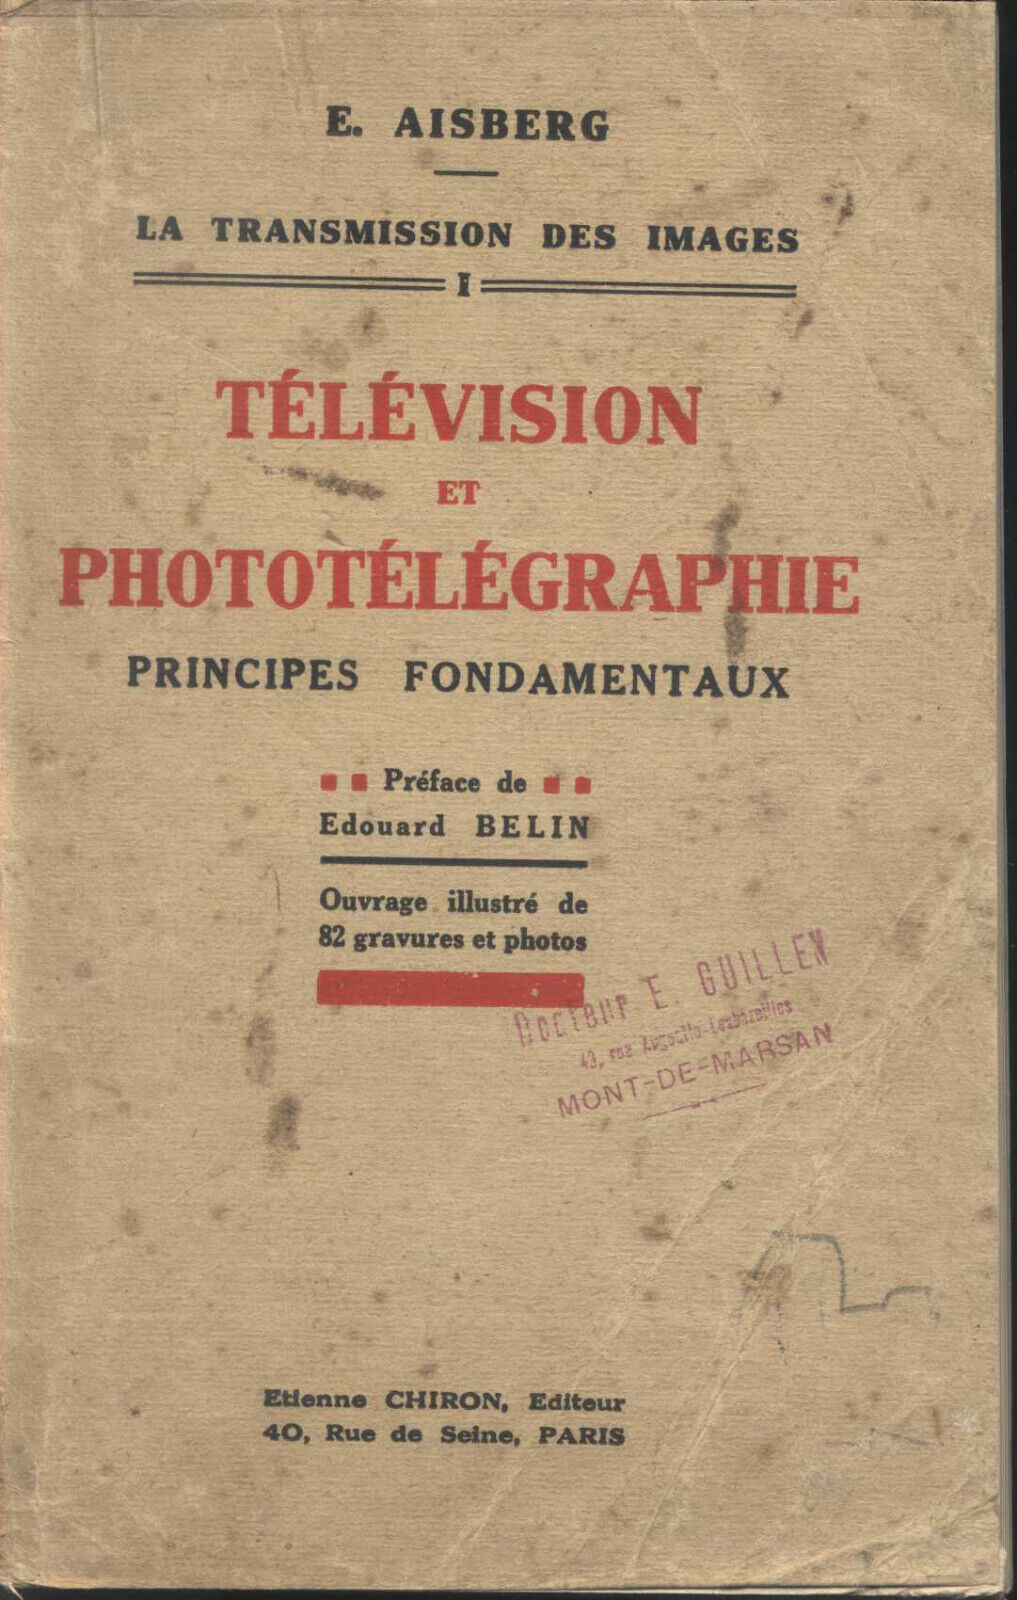 PICTURE TRANSMISSION PHOTOTELEGRAPHY PHOTO TELEGRAPHIE FRENCH